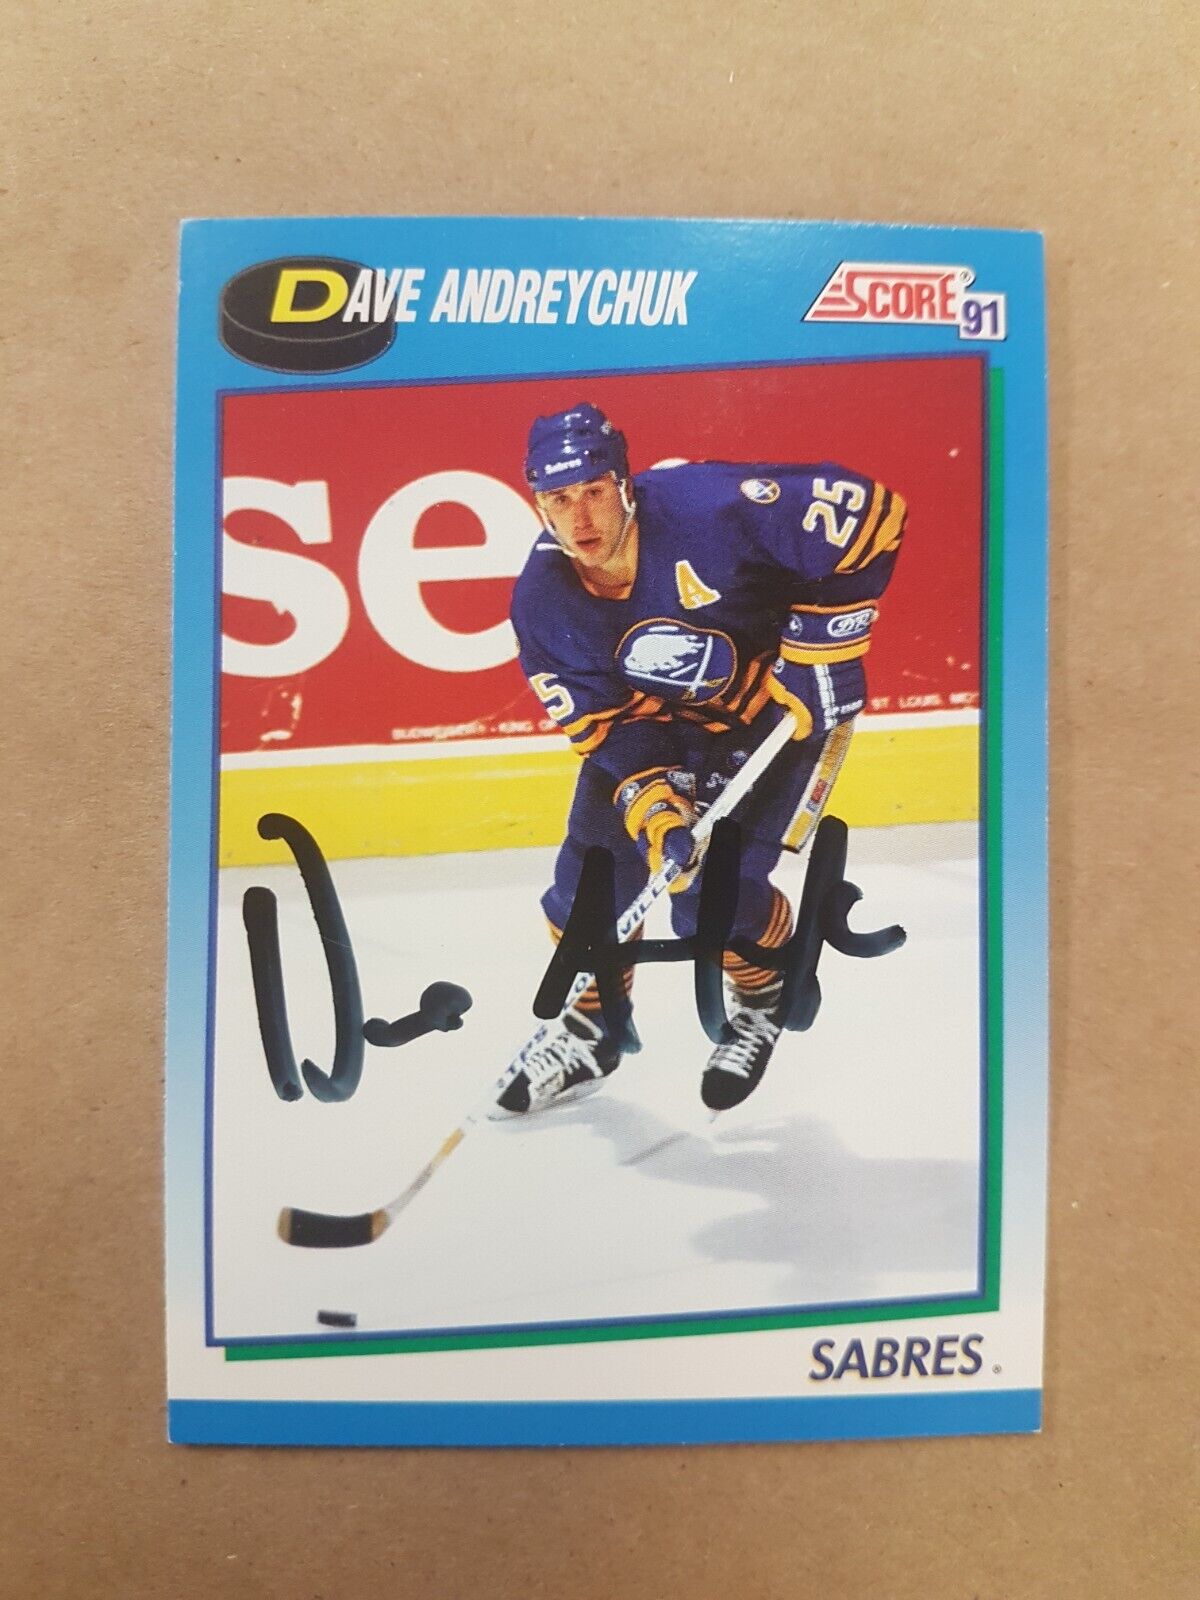 Dave Andreychuk Score 1991 Sabres Autograph Card Signed Hockey 497